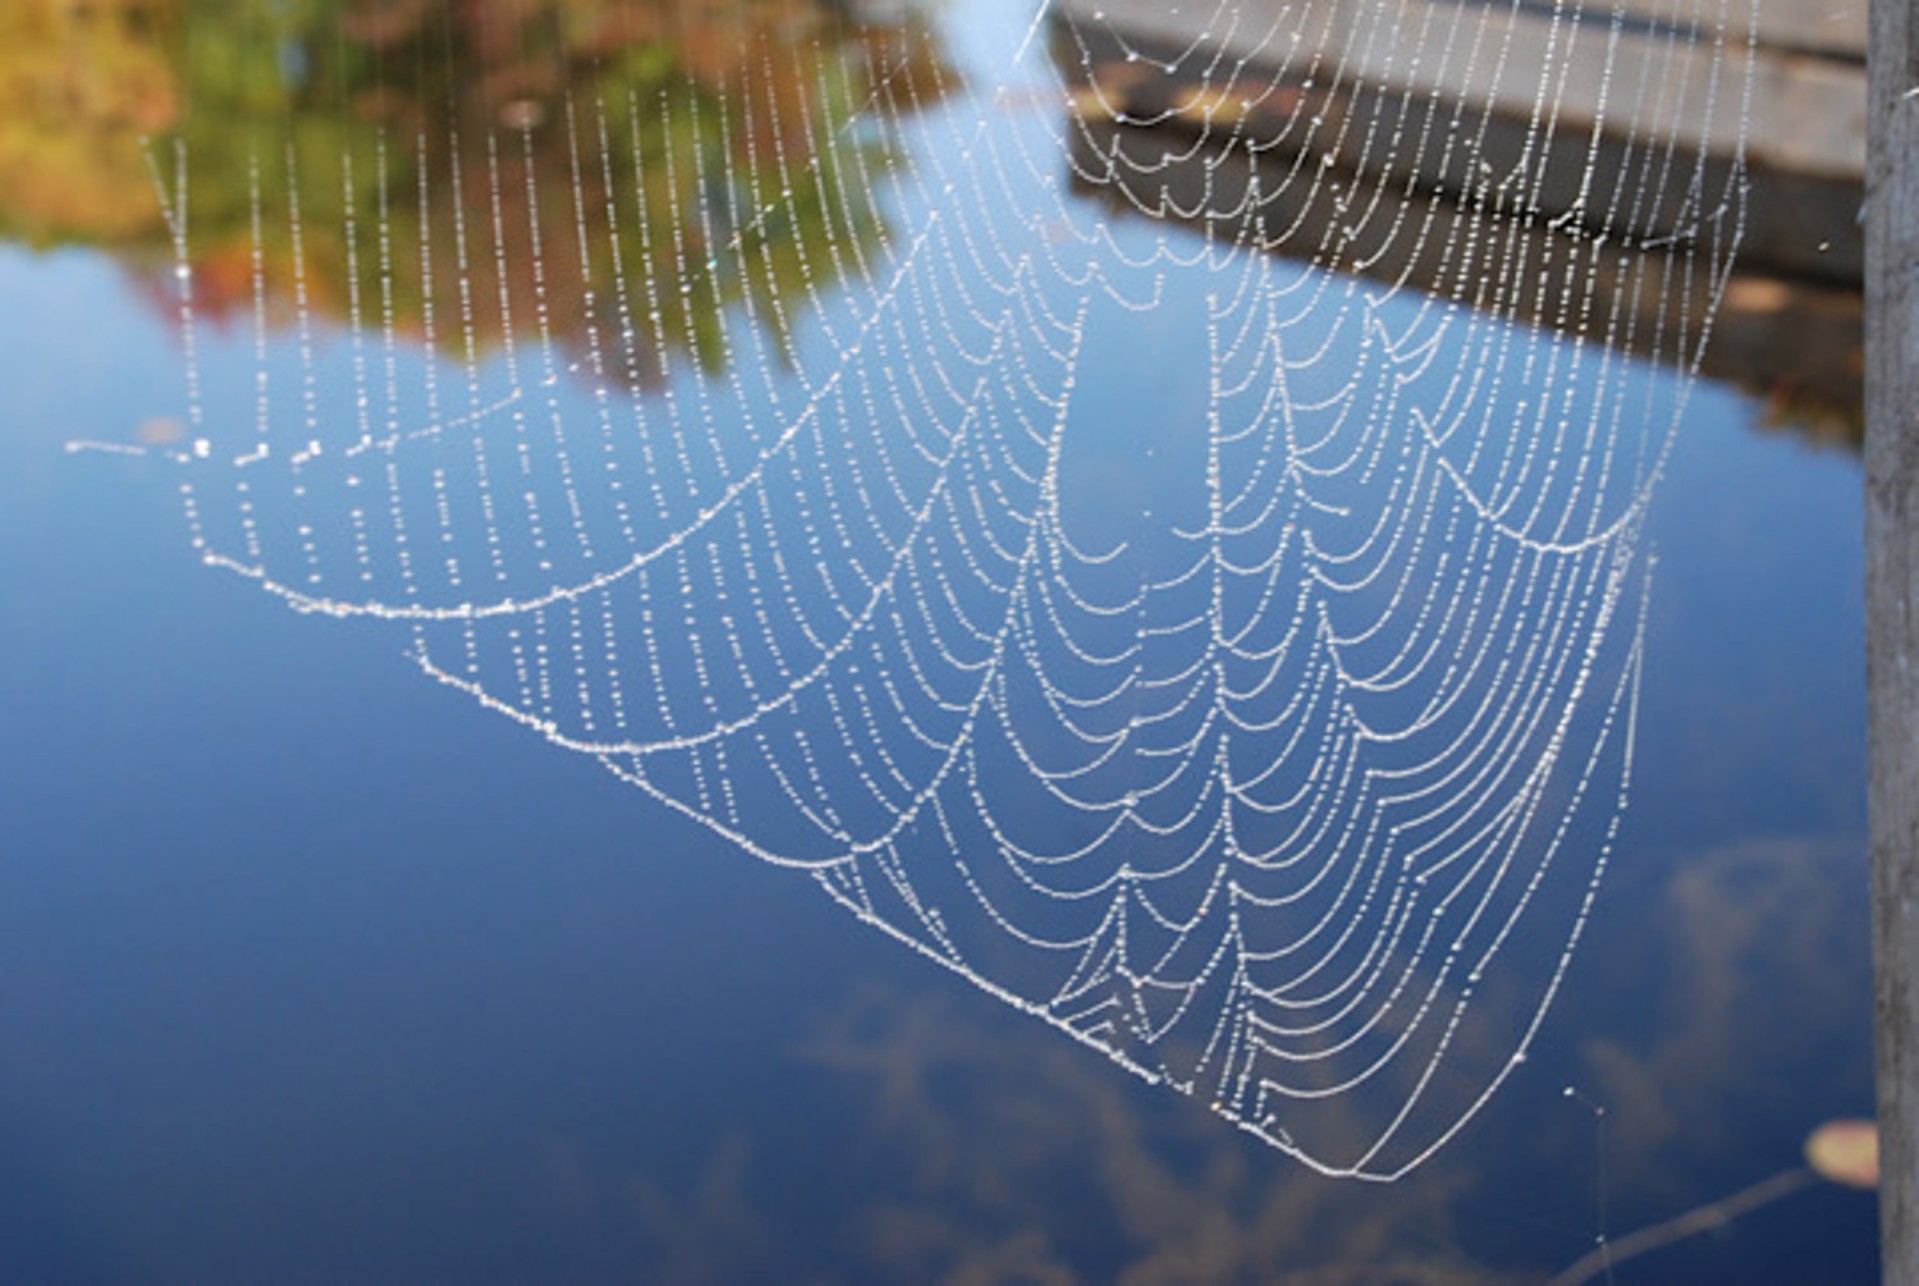 Spider Web by Michael Harris